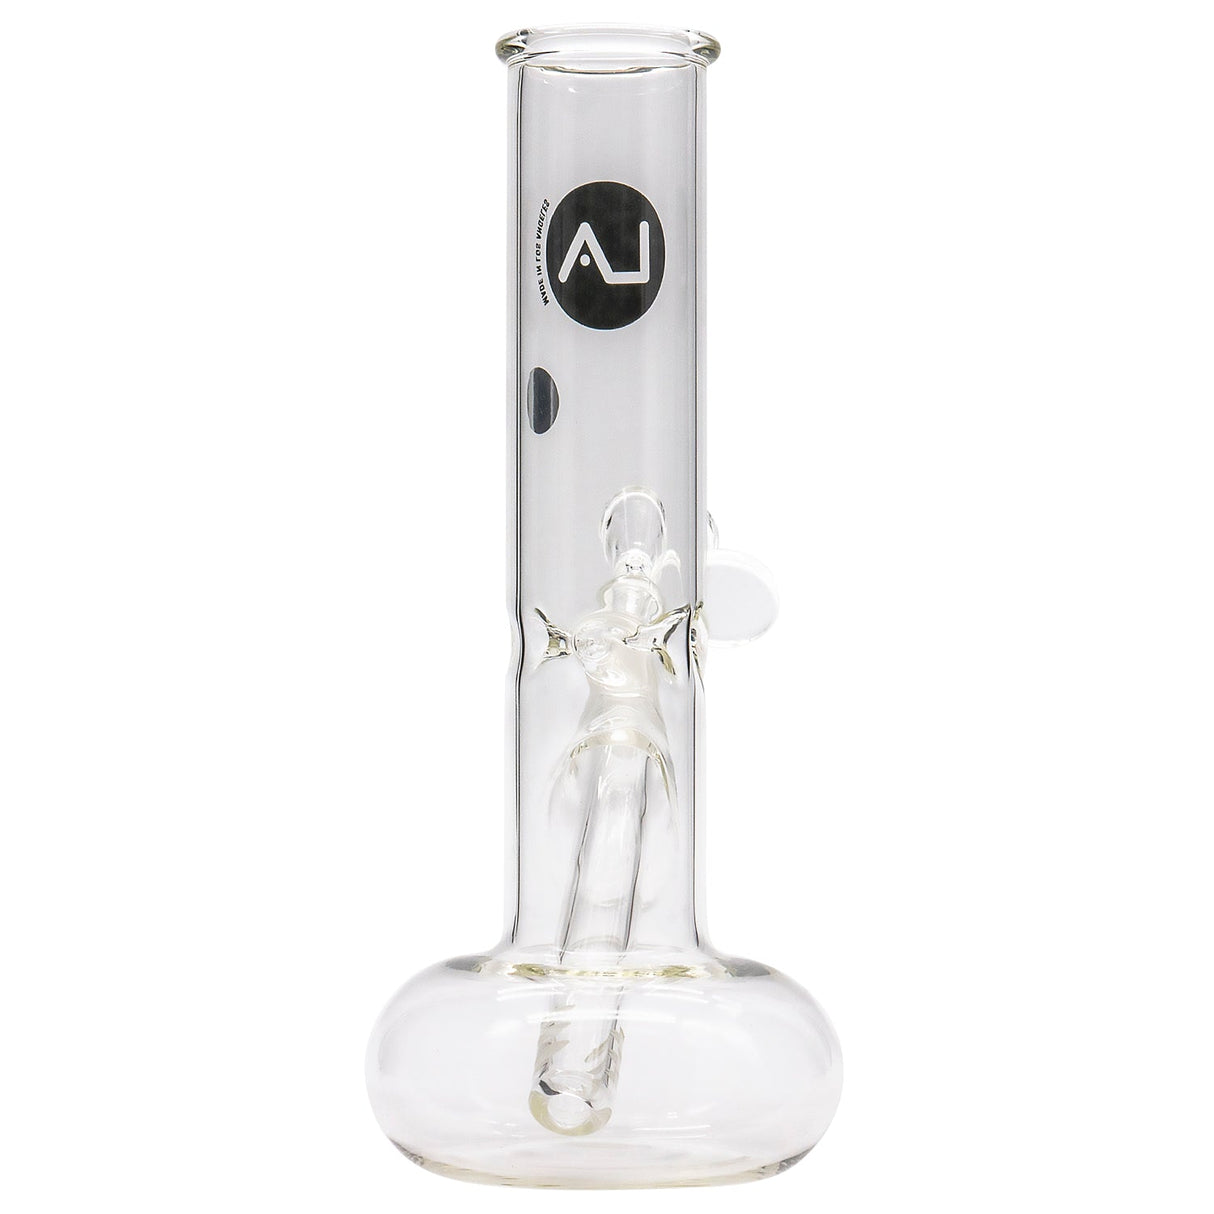 LA Pipes Donut Base Bong in clear borosilicate glass, front view on white background